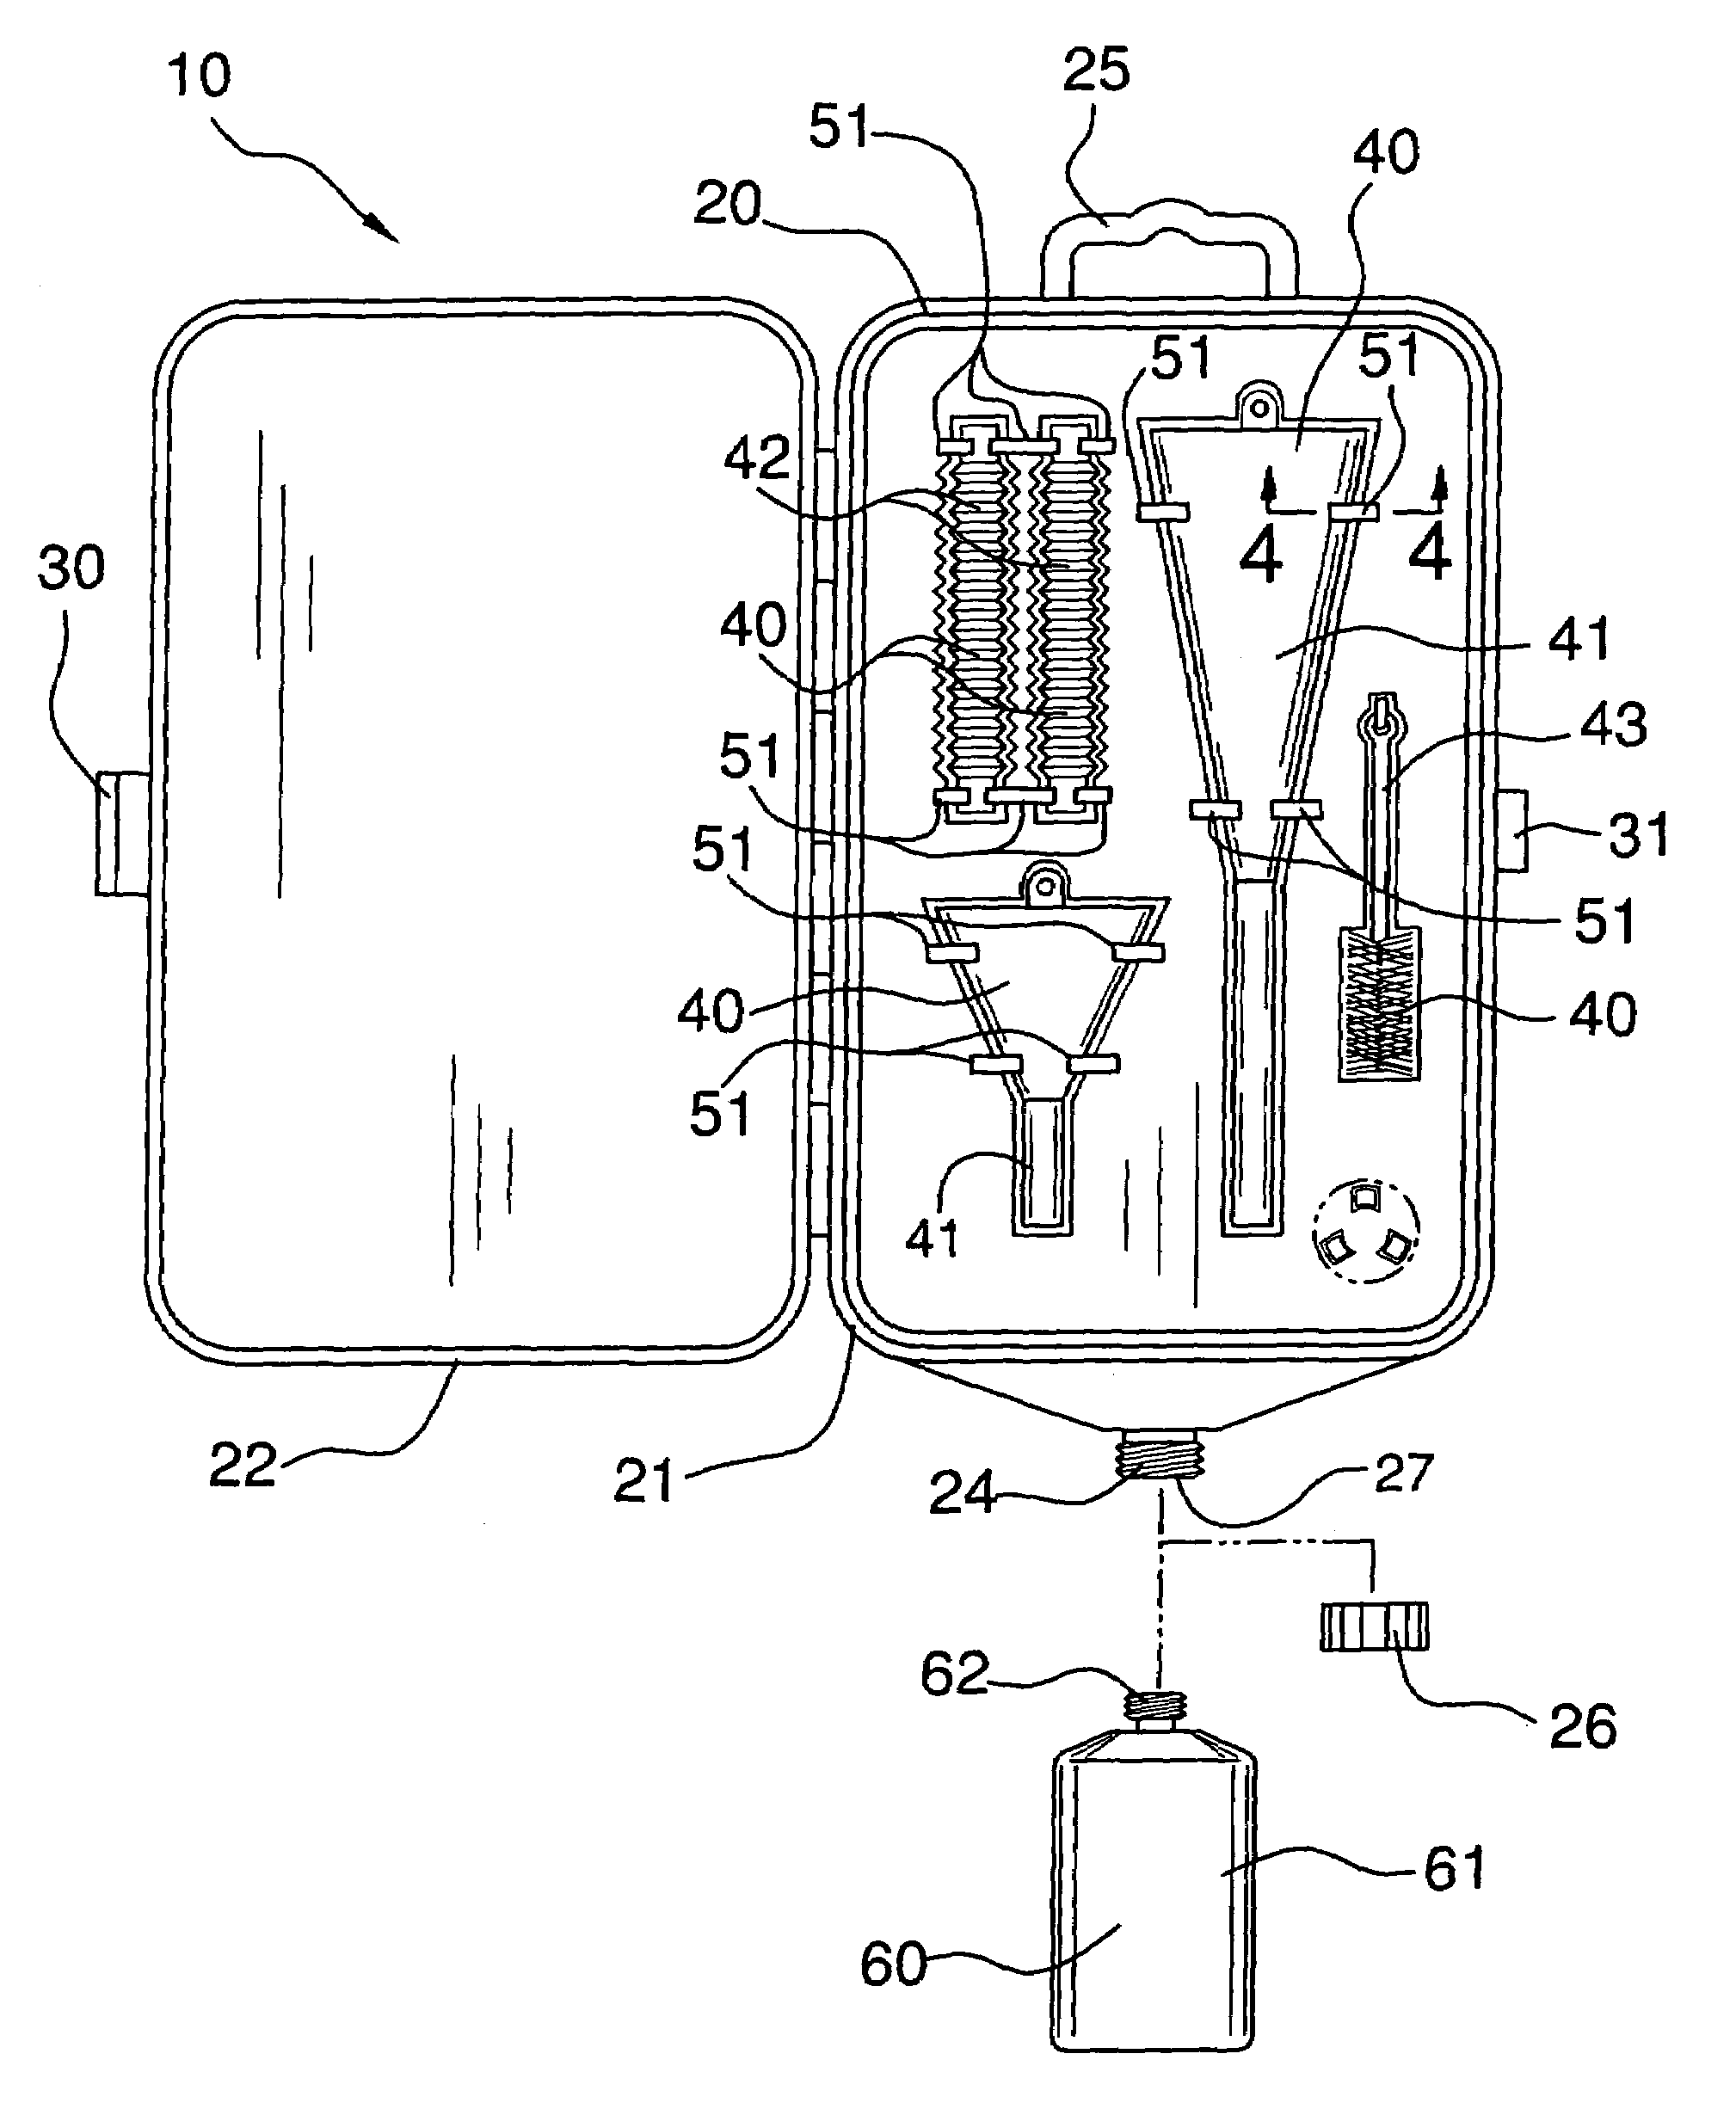 Combined funnel kit and fluid collection device